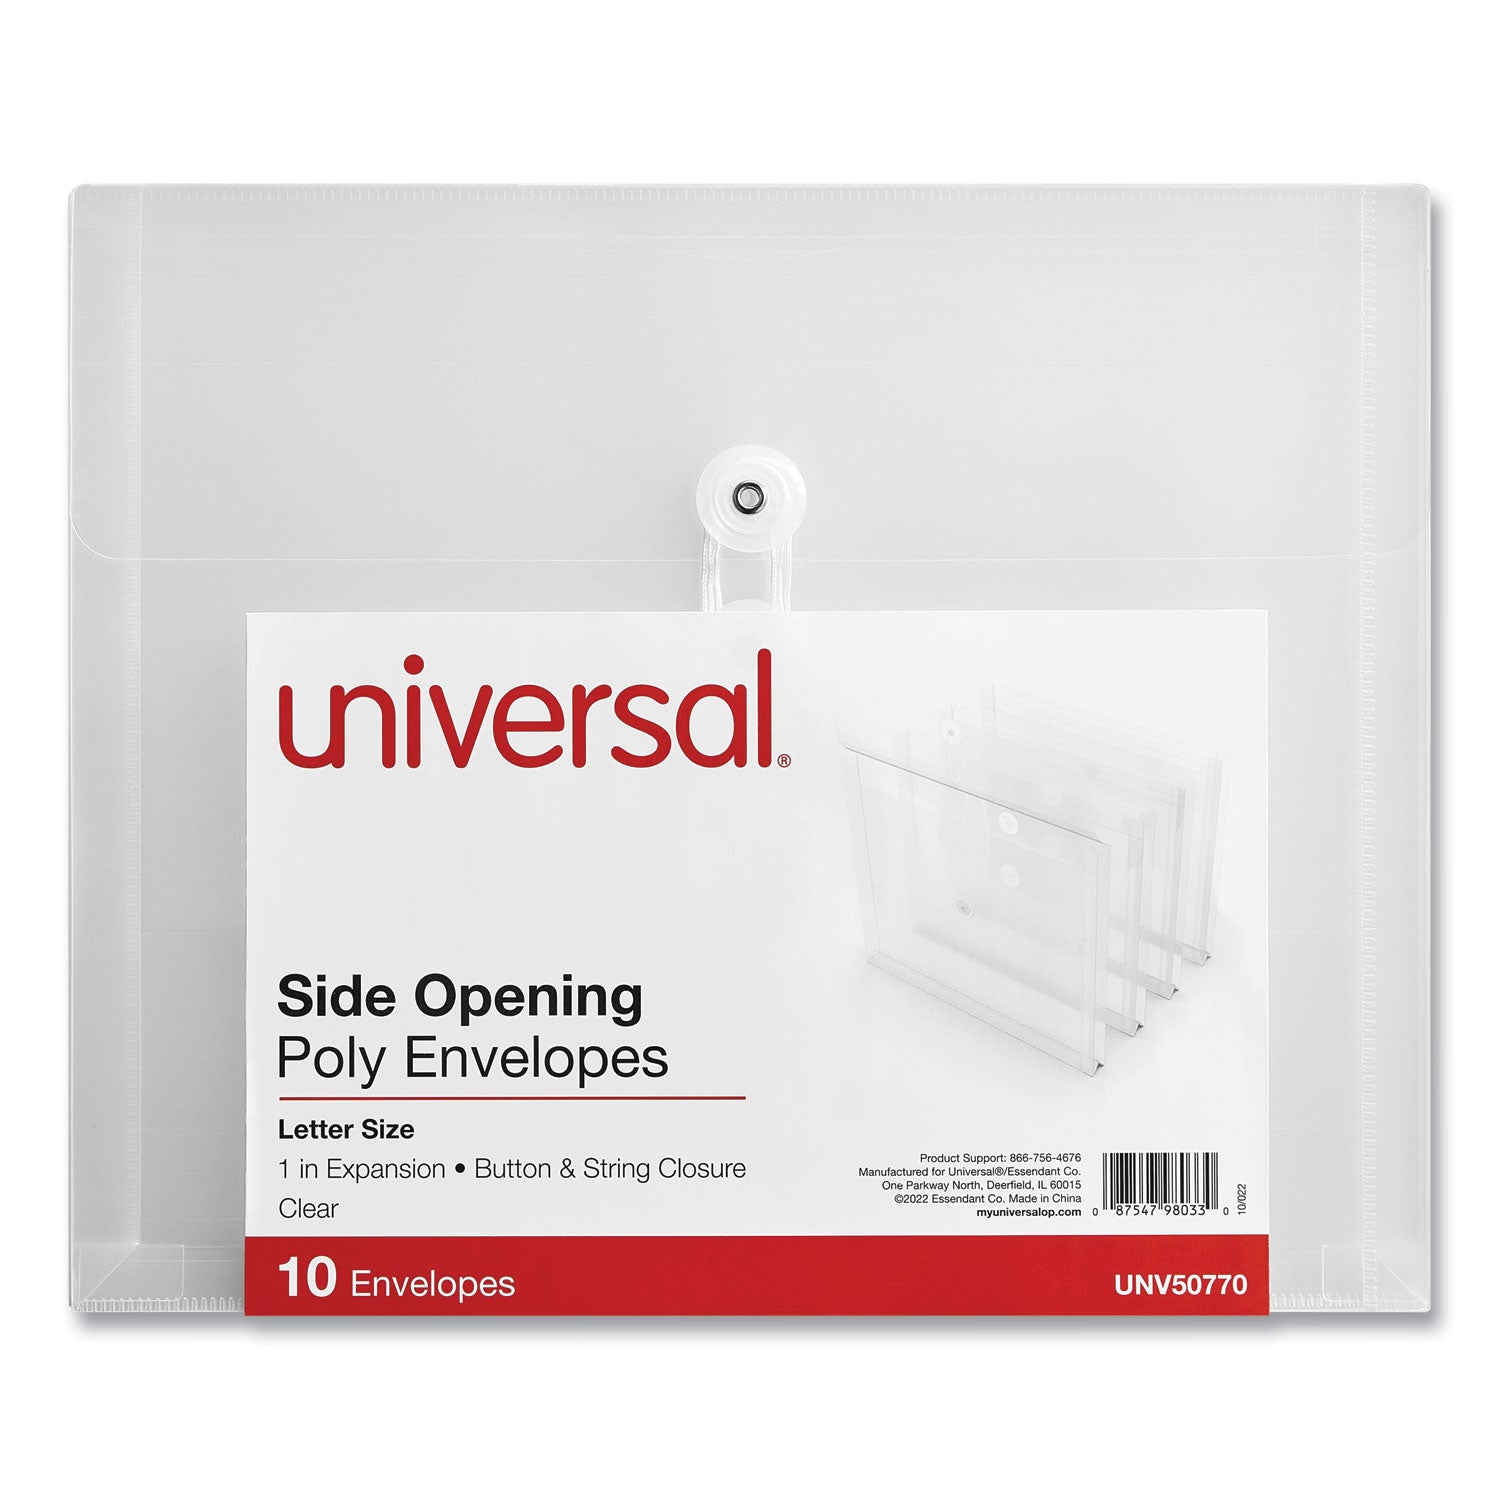 side-opening-poly-envelopes-1-expansion-letter-size-clear-10-pack_unv50770 - 2